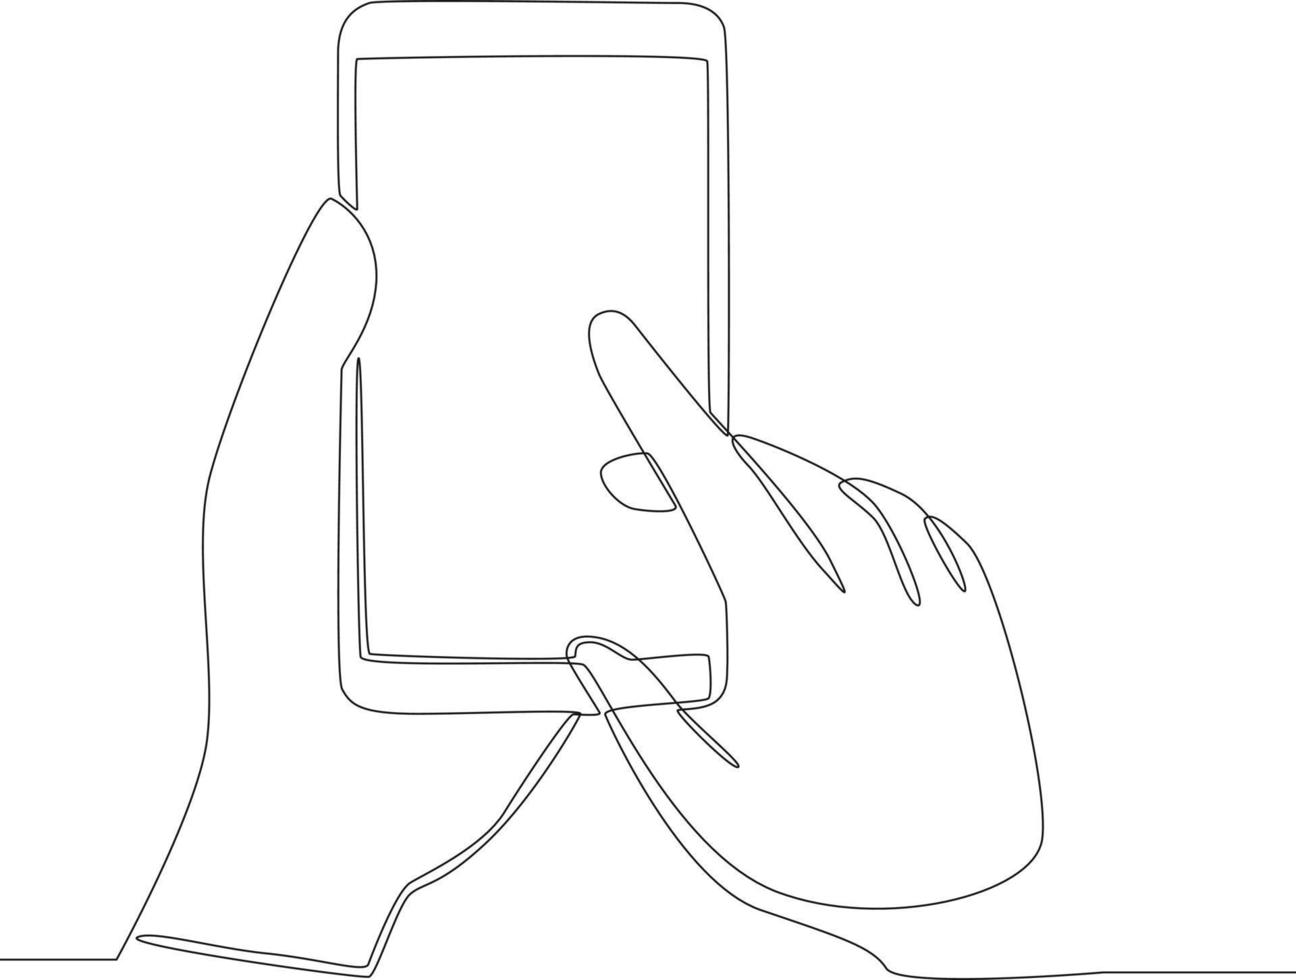 Continuous line drawing of point finger on screen mobile phone. People hands using smartphone. Vector illustration.